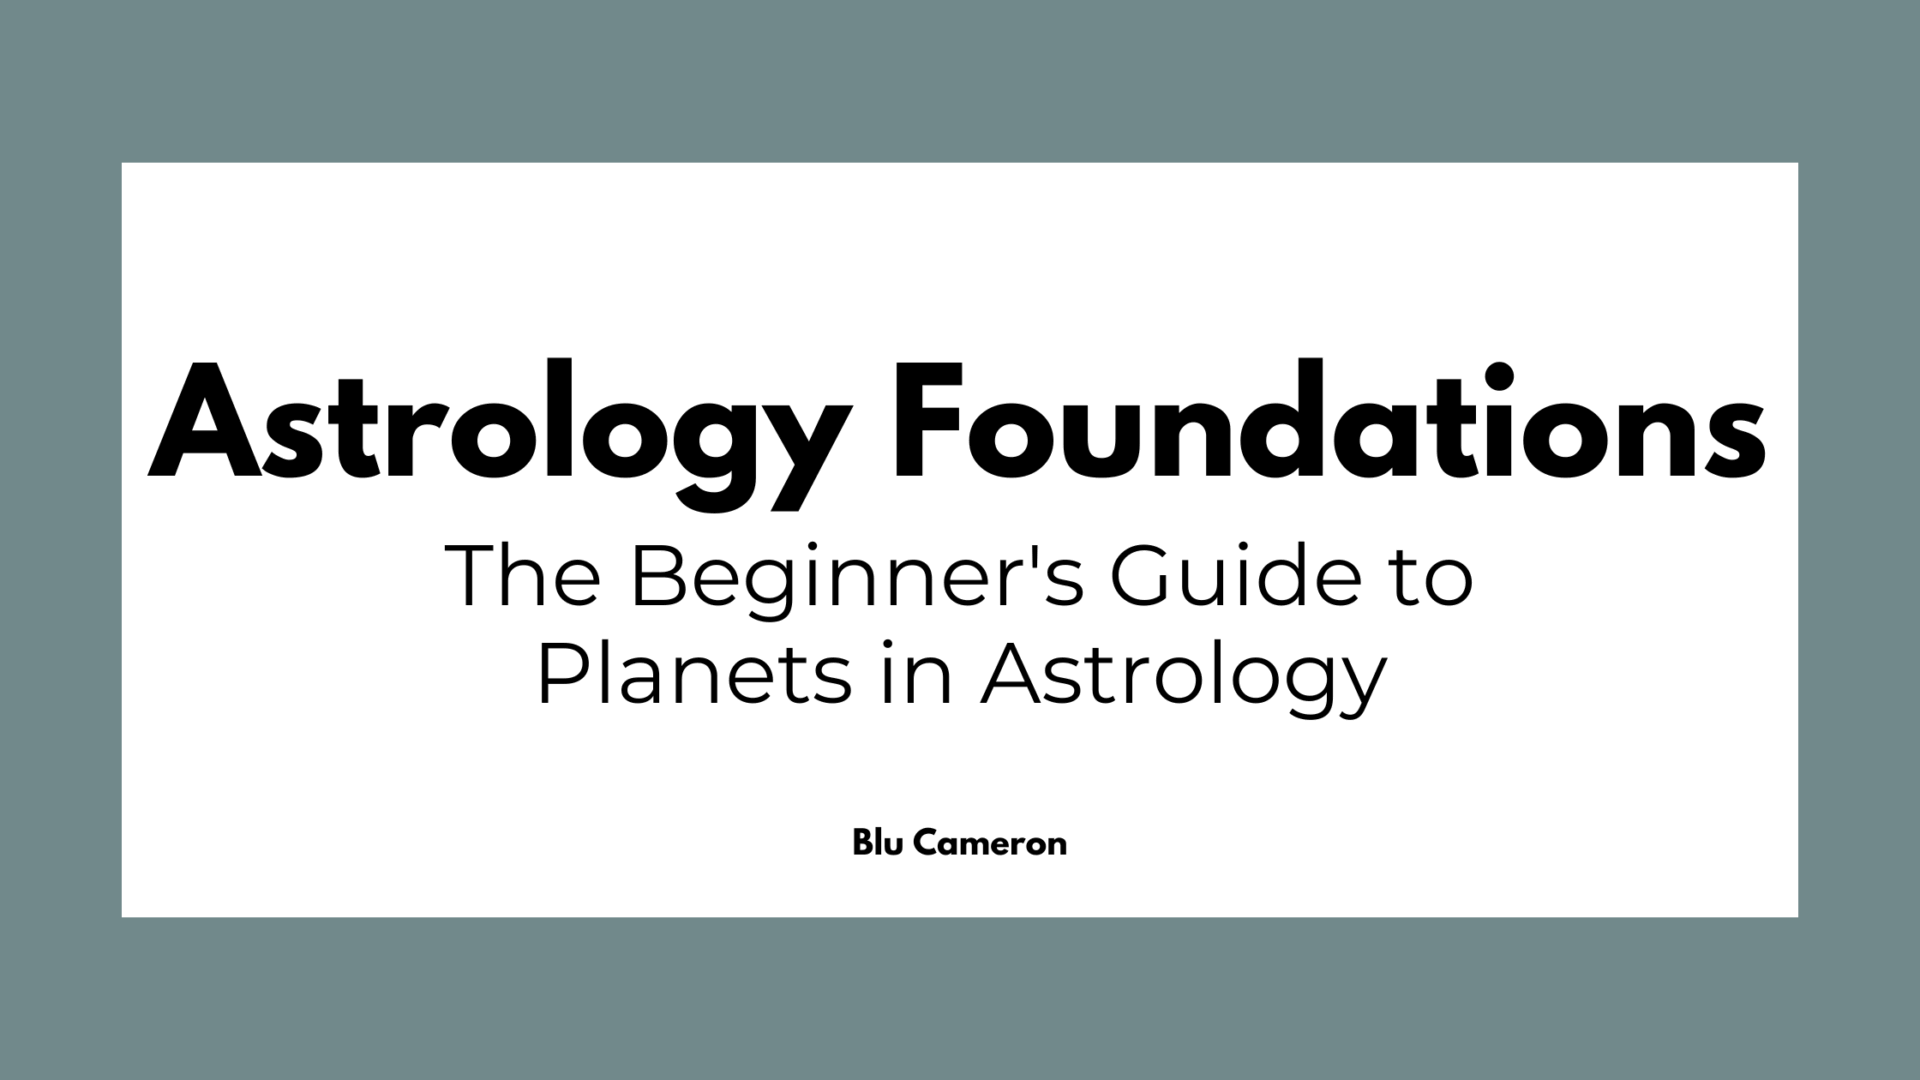 Black text against a white and green background reads: "The Beginner's Guide to Planets in Astrology"